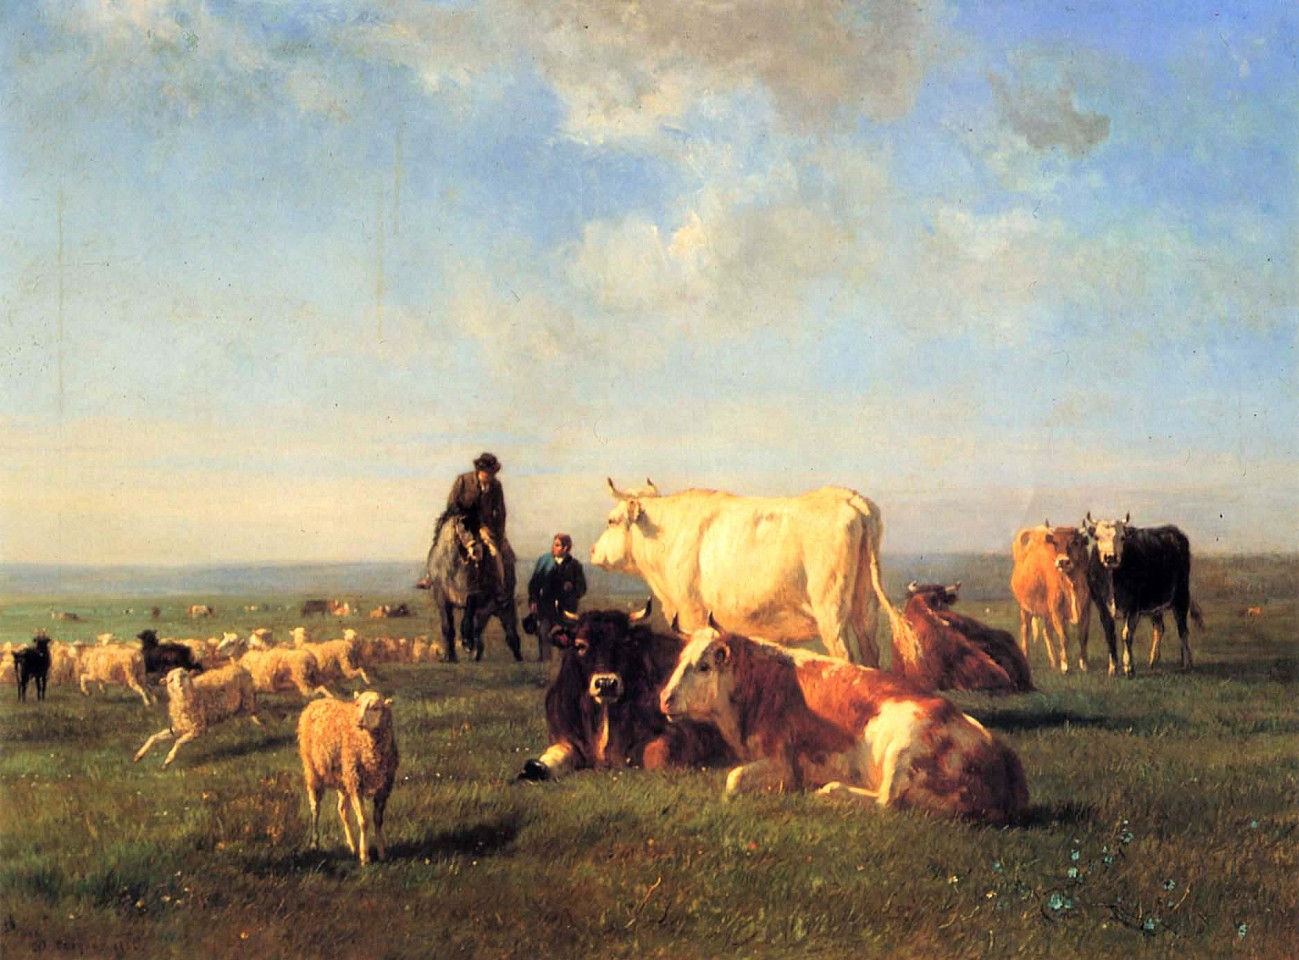 Constant Troyon, Cows and Sheep Grazing, 1862
Oil on canvas, 31 1/2 x 42 1/2 in. (80 x 108 cm)
TRO-003-PA
Appraisal Value: $300,000 est.
User2: $0.00
User3: $0.00